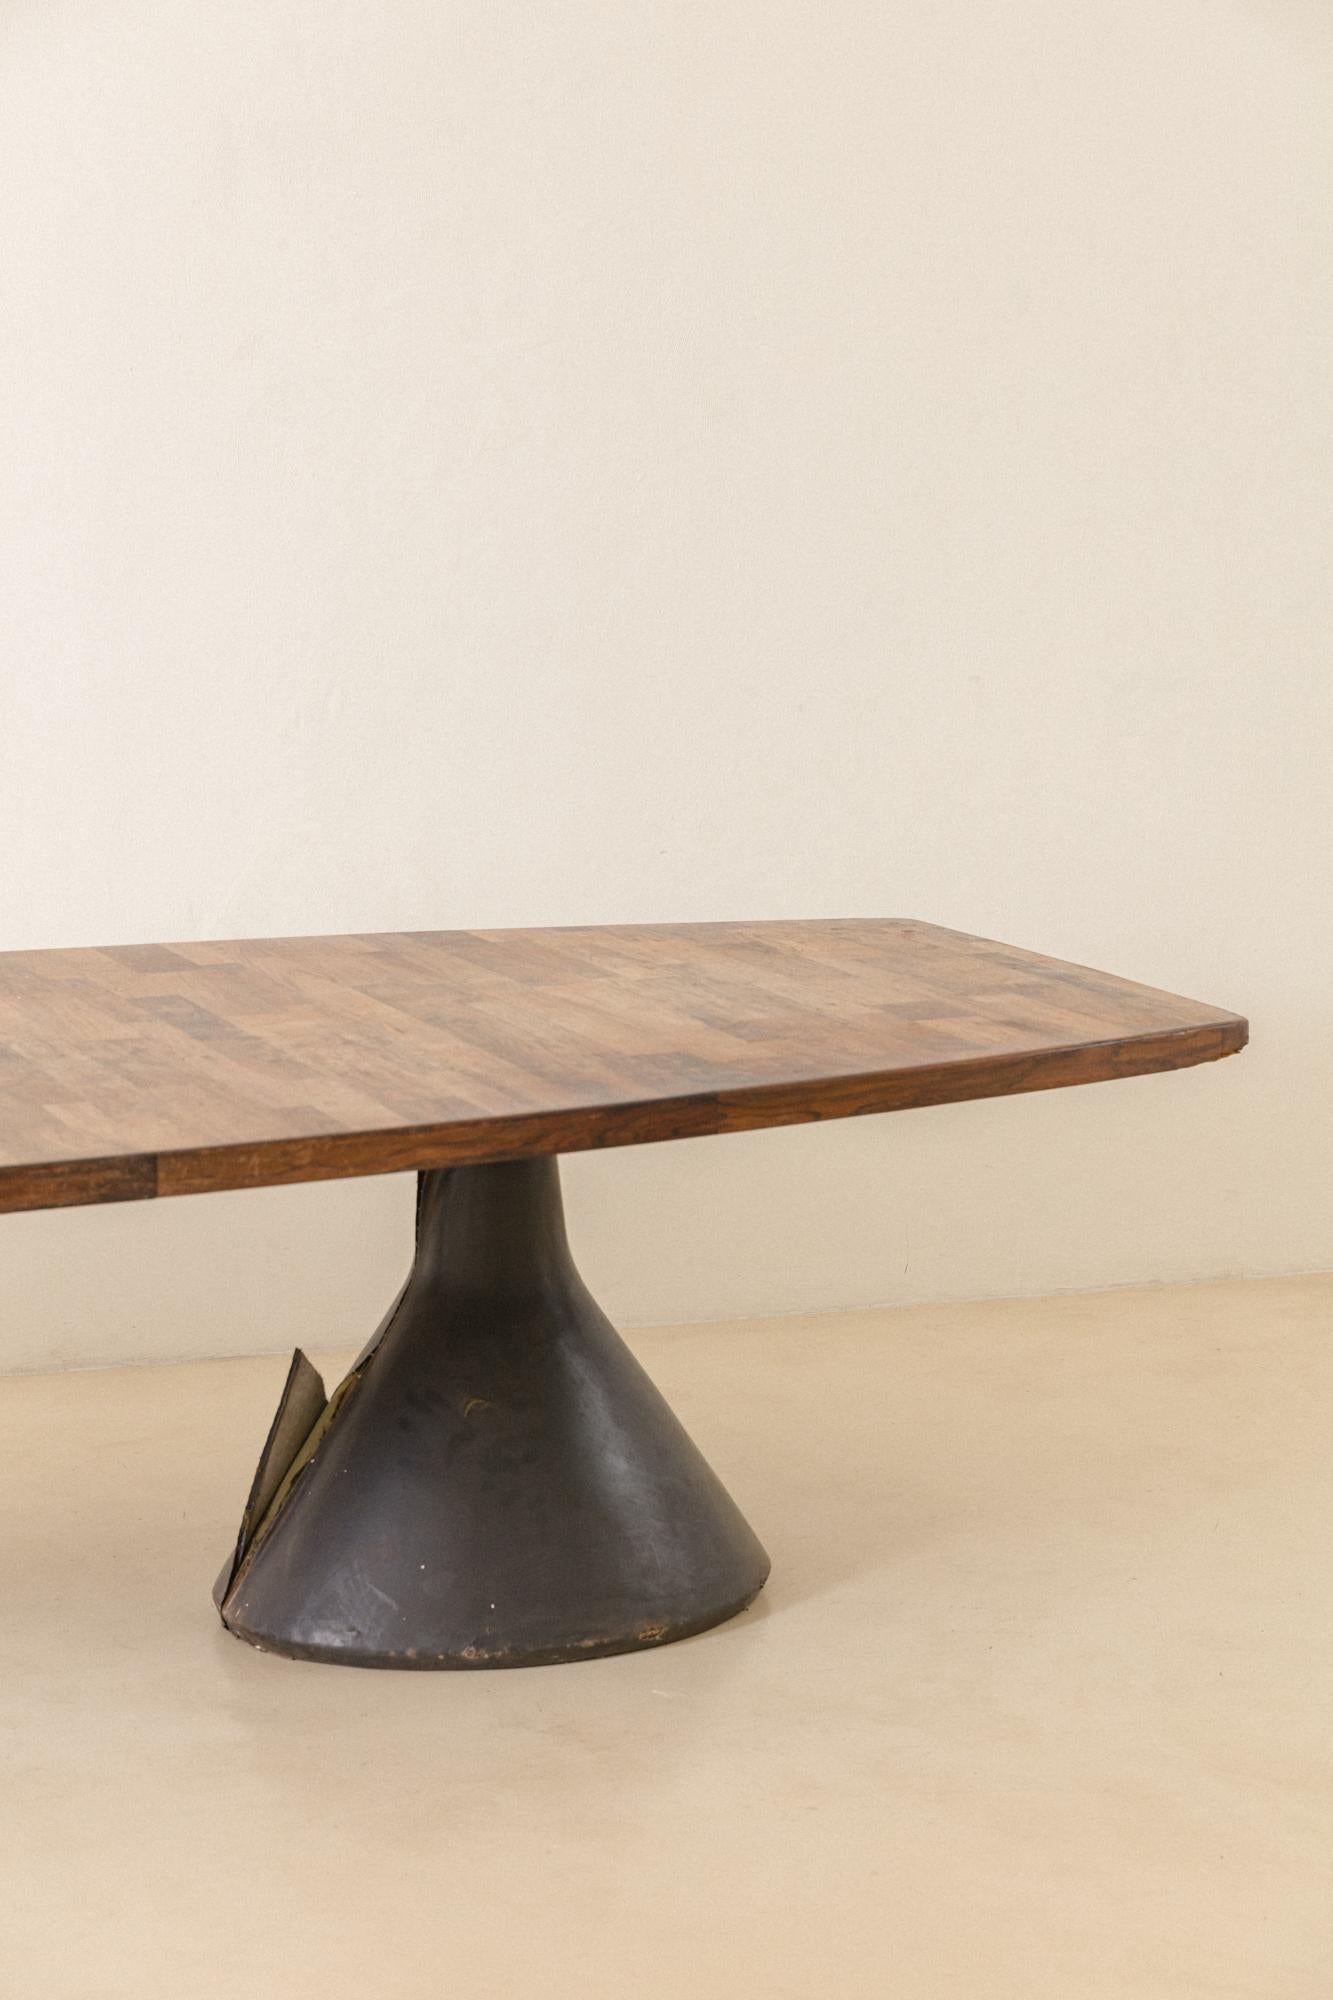 Jorge Zalszupin Guanabara Rosewood Vintage Dining Table, 1959, Brazilian Design In Fair Condition For Sale In New York, NY